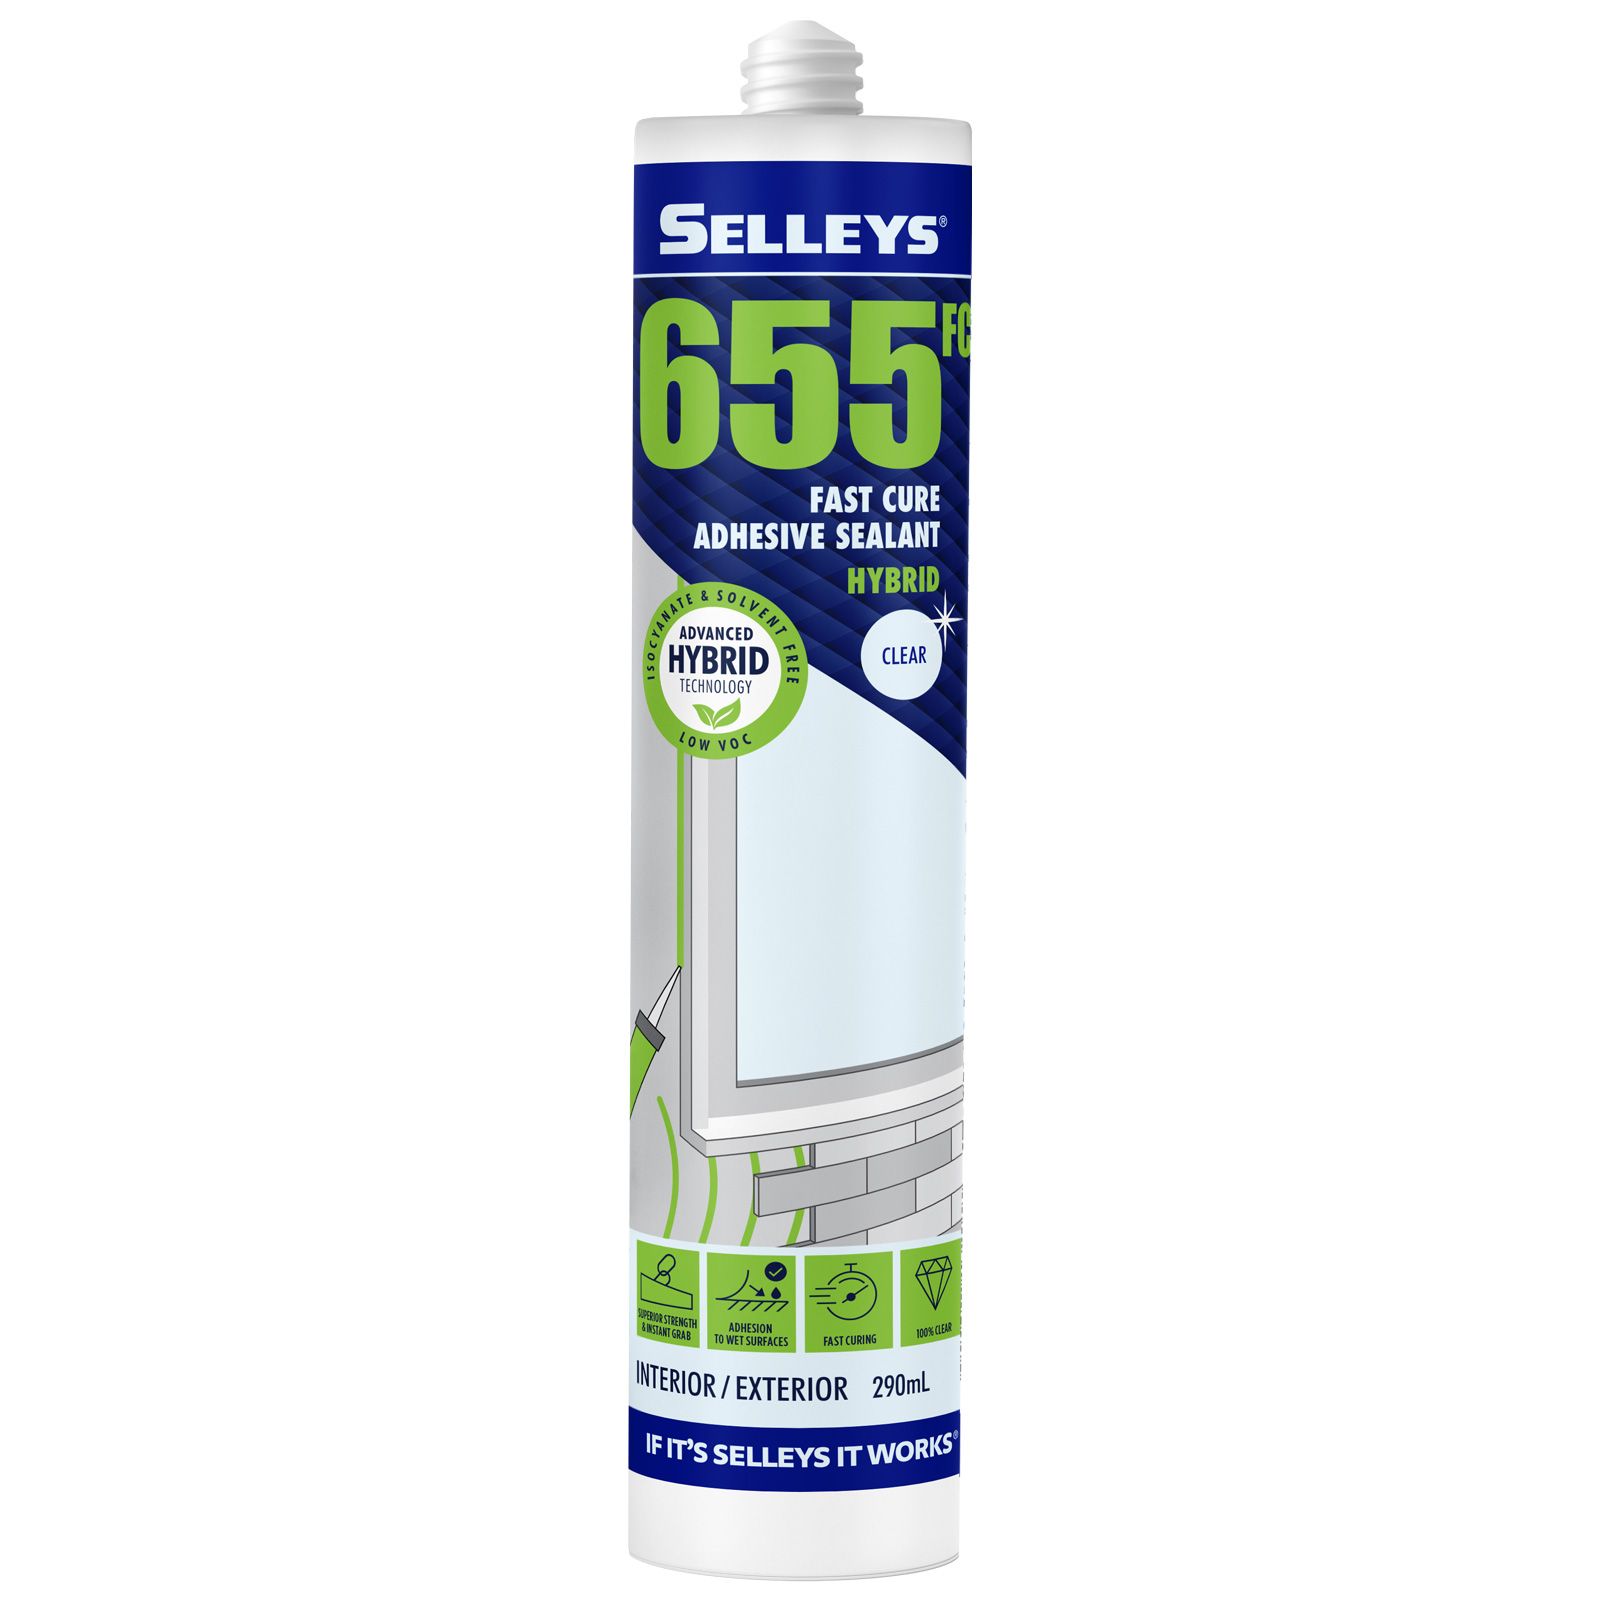 Selleys 655FC Fast Cure Adhesive Sealant